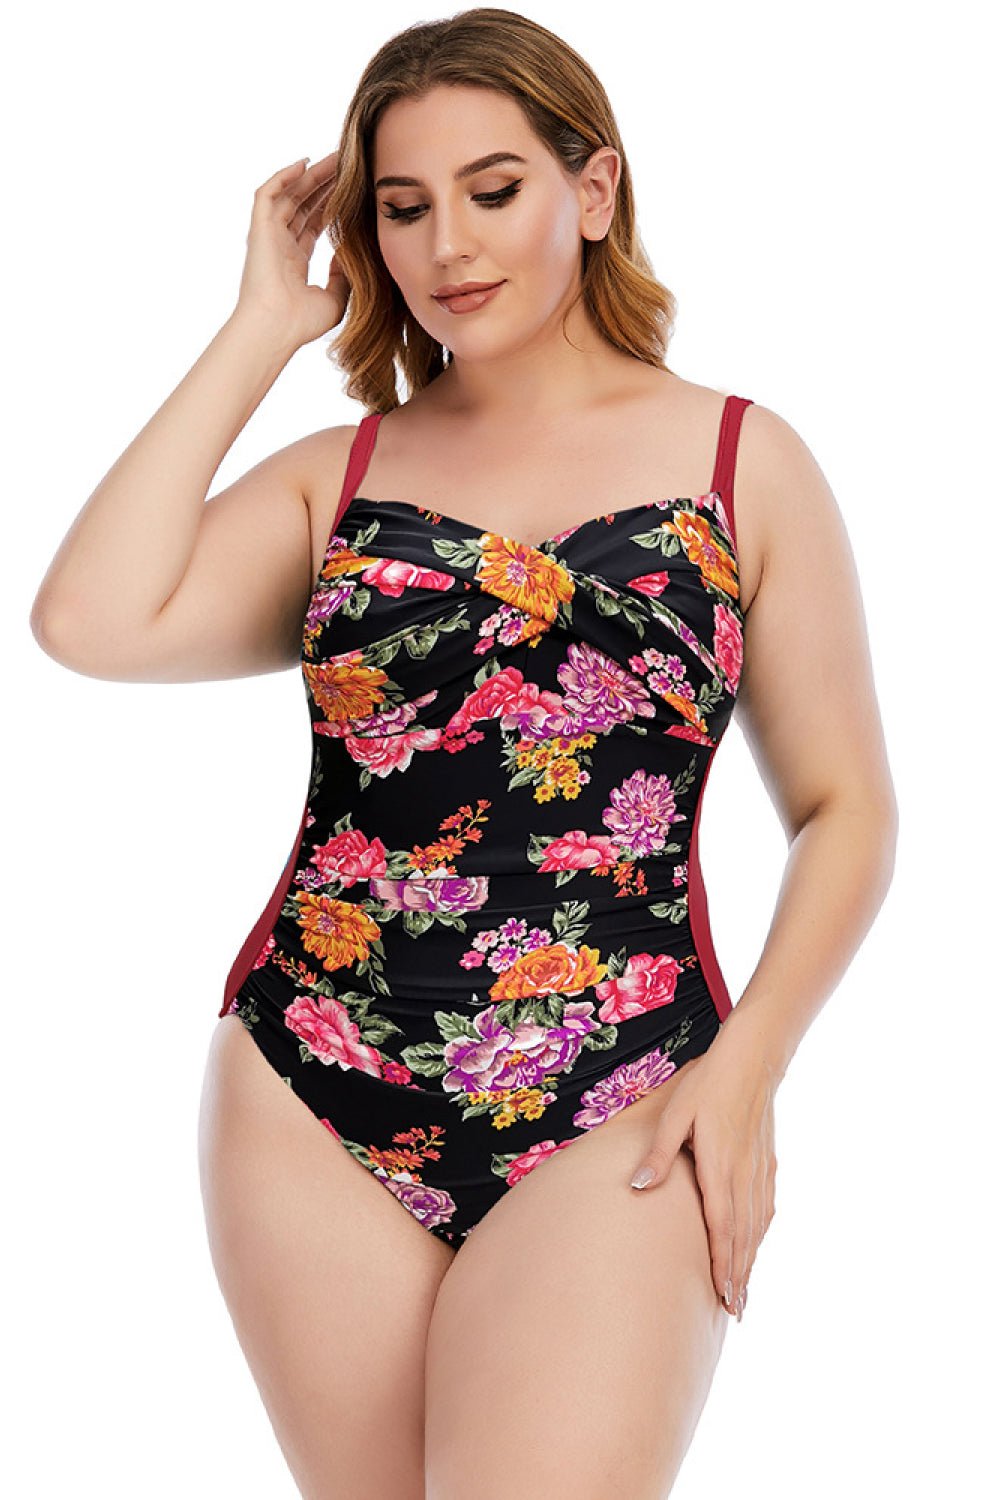 Carol Floral Crisscross One-Piece Plus Size Swimsuit  Sunset and Swim Black/Red M 